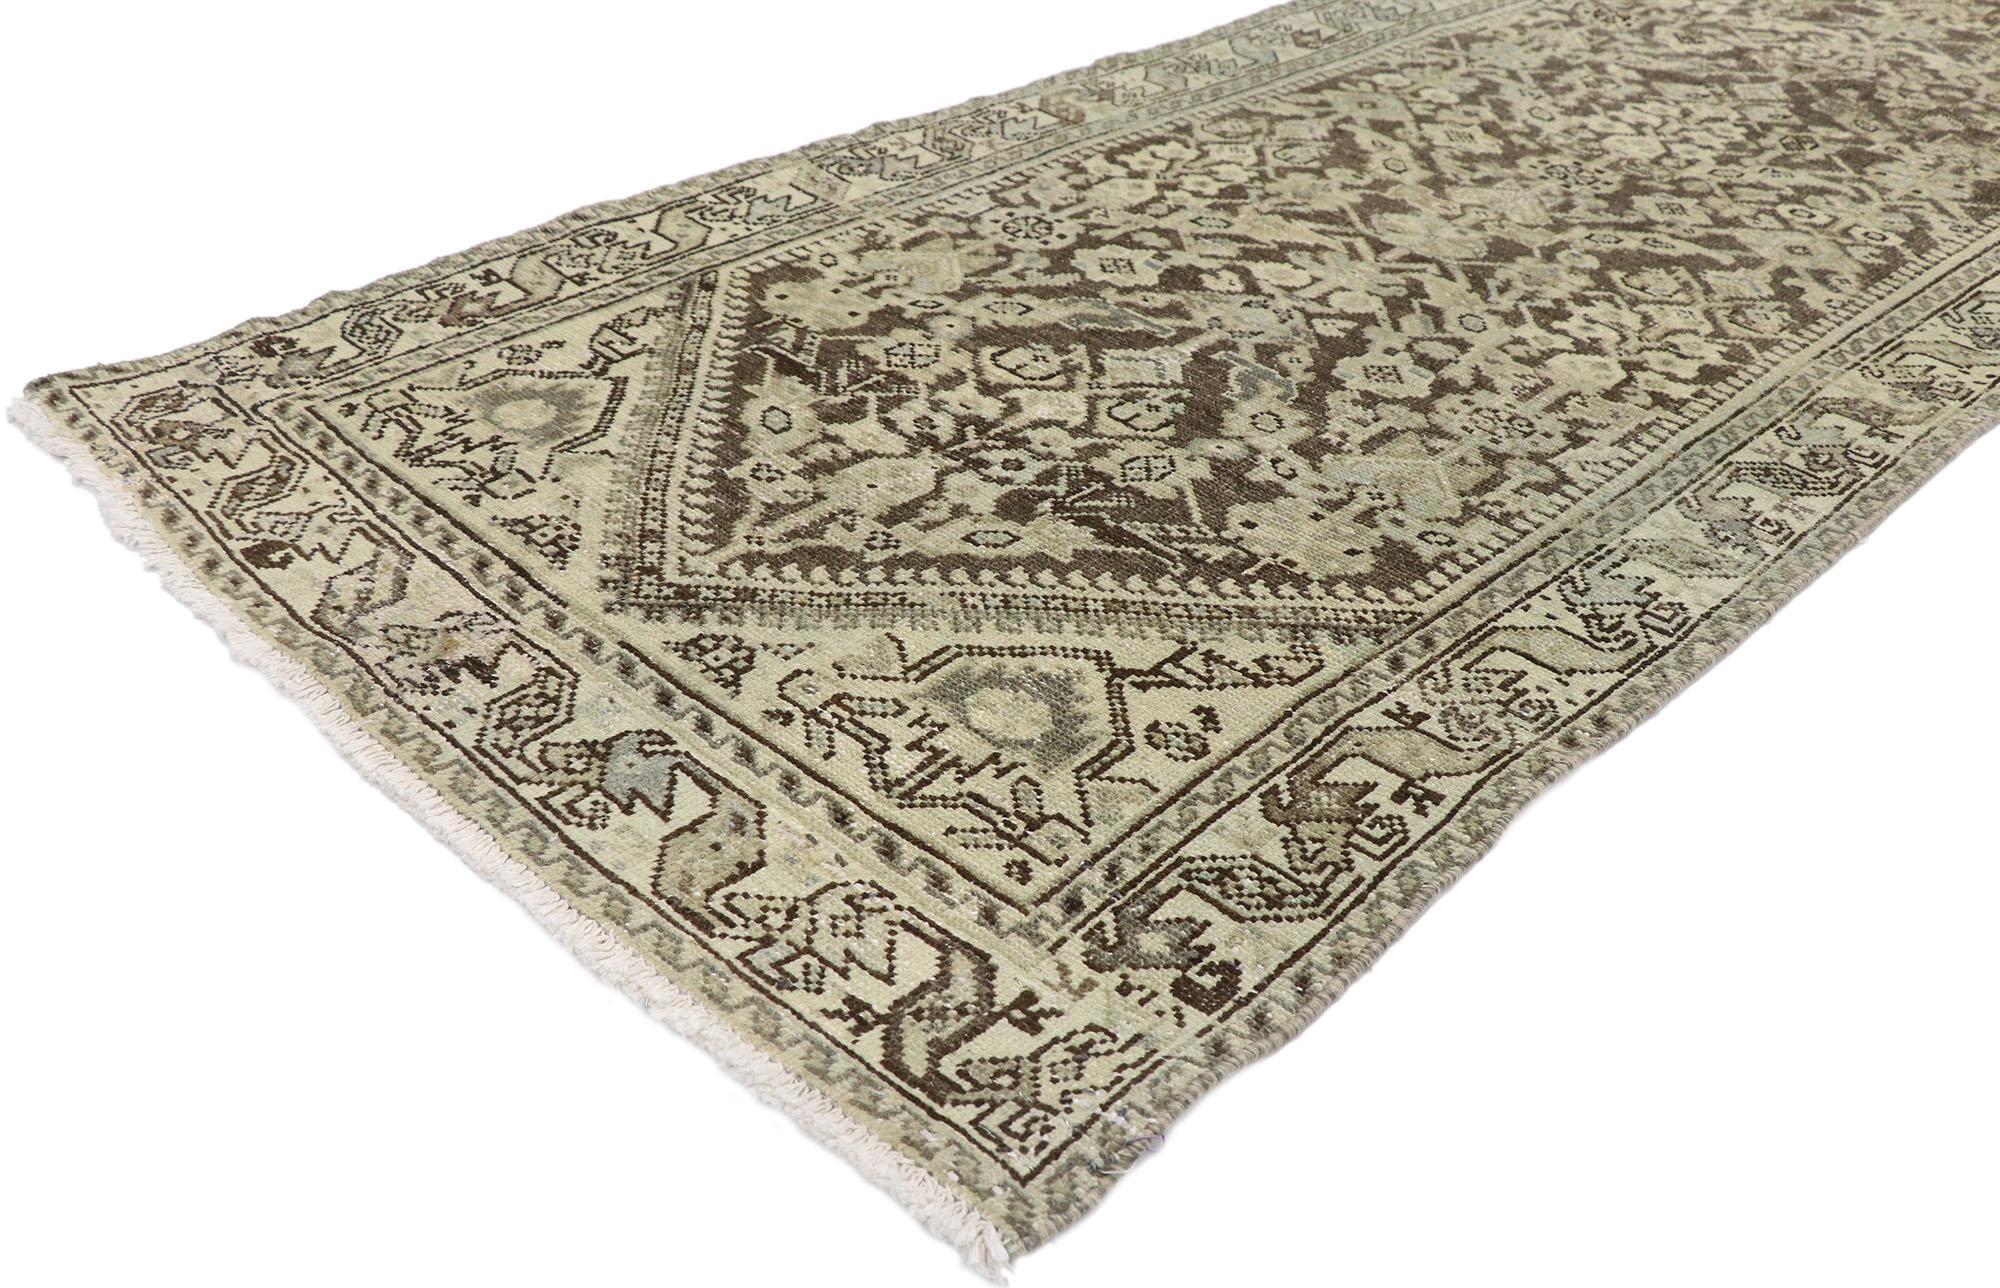 60879 Distressed Antique Persian Mahal runner with Modern Rustic Artisan style 03'06 x 10'05. Warm and inviting with a lovingly time-worn composition, this hand-knotted wool distressed antique Persian Mahal runner will take on a curated lived-in